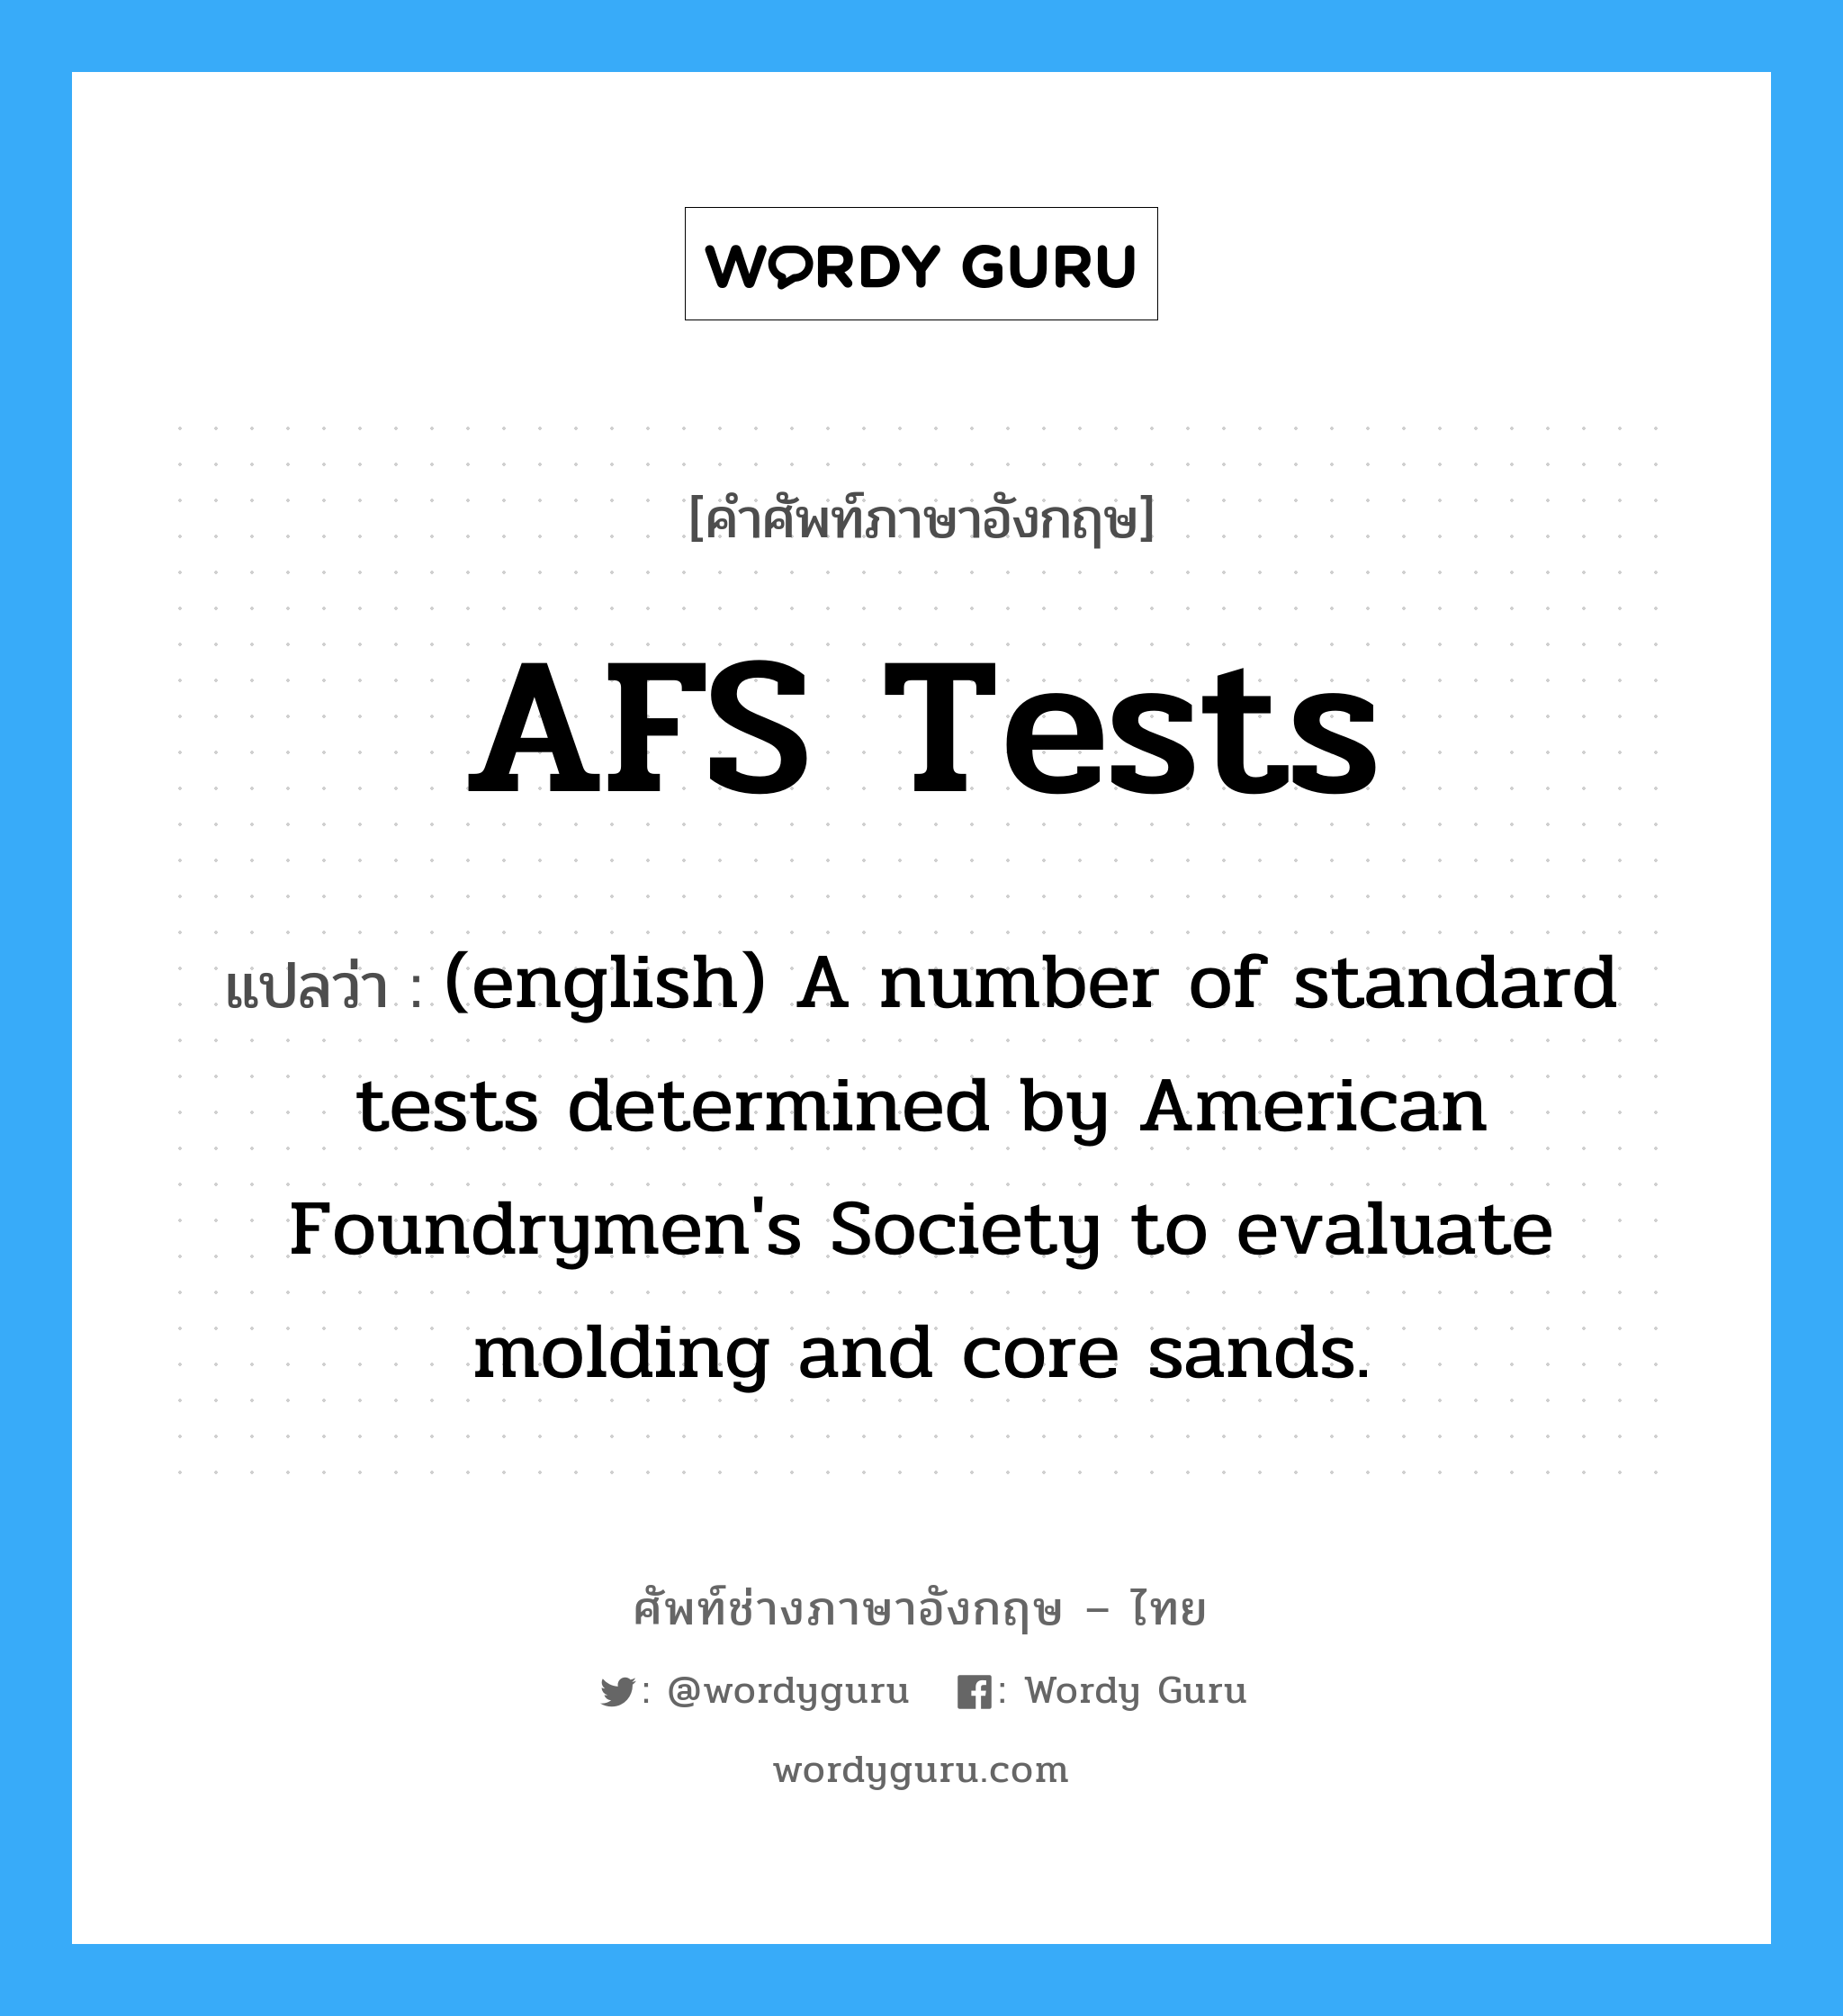 AFS Tests แปลว่า?, คำศัพท์ช่างภาษาอังกฤษ - ไทย AFS Tests คำศัพท์ภาษาอังกฤษ AFS Tests แปลว่า (english) A number of standard tests determined by American Foundrymen's Society to evaluate molding and core sands.